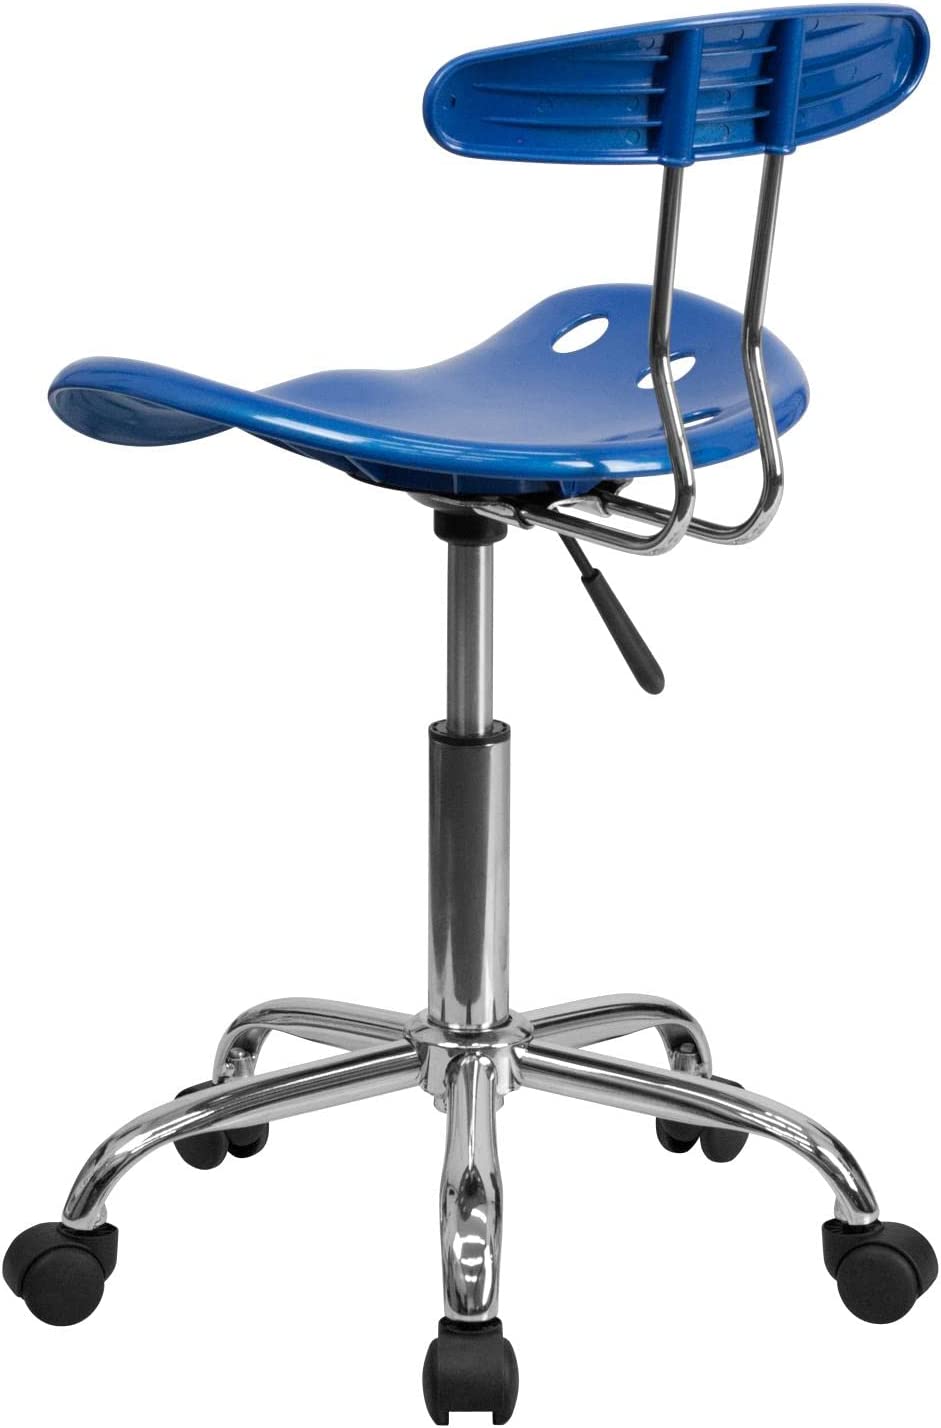 Flash Furniture Vibrant Bright Blue and Chrome Swivel Task Office Chair with Tractor Seat